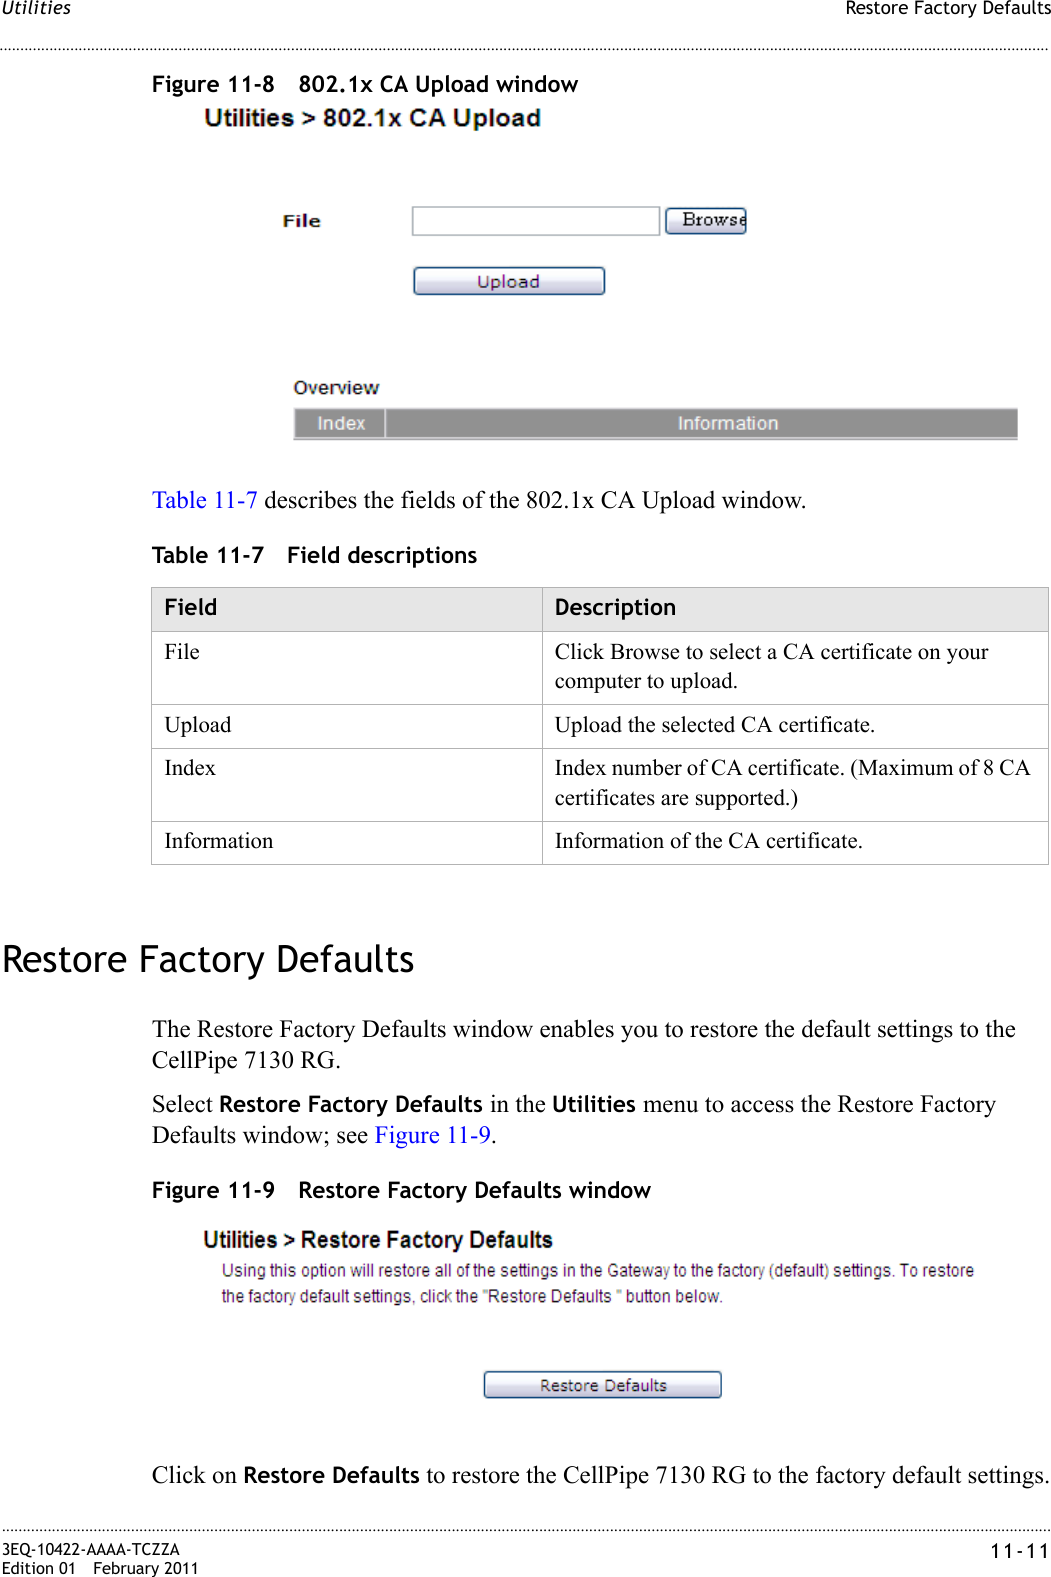 Restore Factory DefaultsUtilities............................................................................................................................................................................................................................................................3EQ-10422-AAAA-TCZZAEdition 01 February 2011 11-11............................................................................................................................................................................................................................................................Figure 11-8 802.1x CA Upload windowTable 11-7 describes the fields of the 802.1x CA Upload window.Table 11-7 Field descriptionsRestore Factory DefaultsThe Restore Factory Defaults window enables you to restore the default settings to the CellPipe 7130 RG.Select Restore Factory Defaults in the Utilities menu to access the Restore Factory Defaults window; see Figure 11-9.Figure 11-9 Restore Factory Defaults windowClick on Restore Defaults to restore the CellPipe 7130 RG to the factory default settings.Field DescriptionFile Click Browse to select a CA certificate on your computer to upload.Upload Upload the selected CA certificate.Index Index number of CA certificate. (Maximum of 8 CA certificates are supported.)Information Information of the CA certificate.